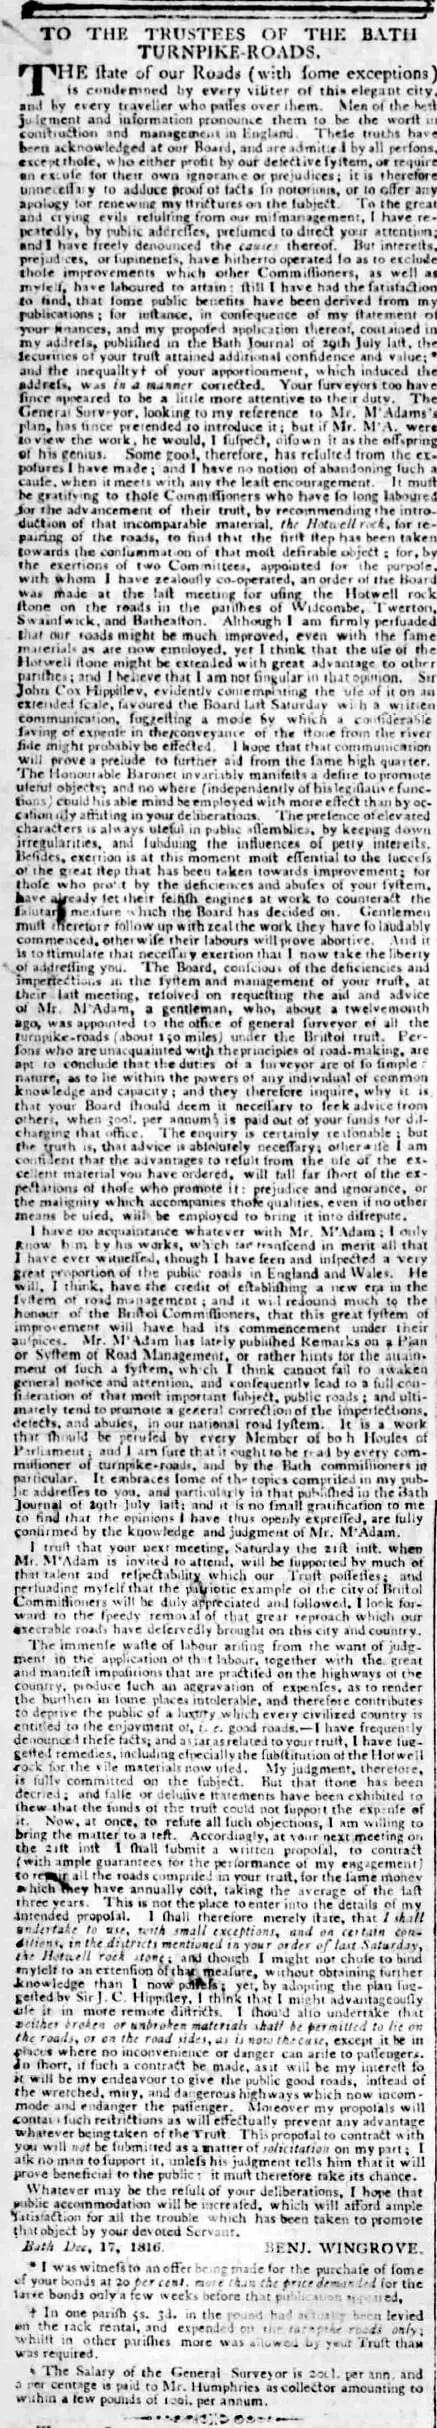 Benjamin Wingrove letter to turnpike trustees - Bath Chronicle and Weekly Gazette - Thursday 19 December 1816